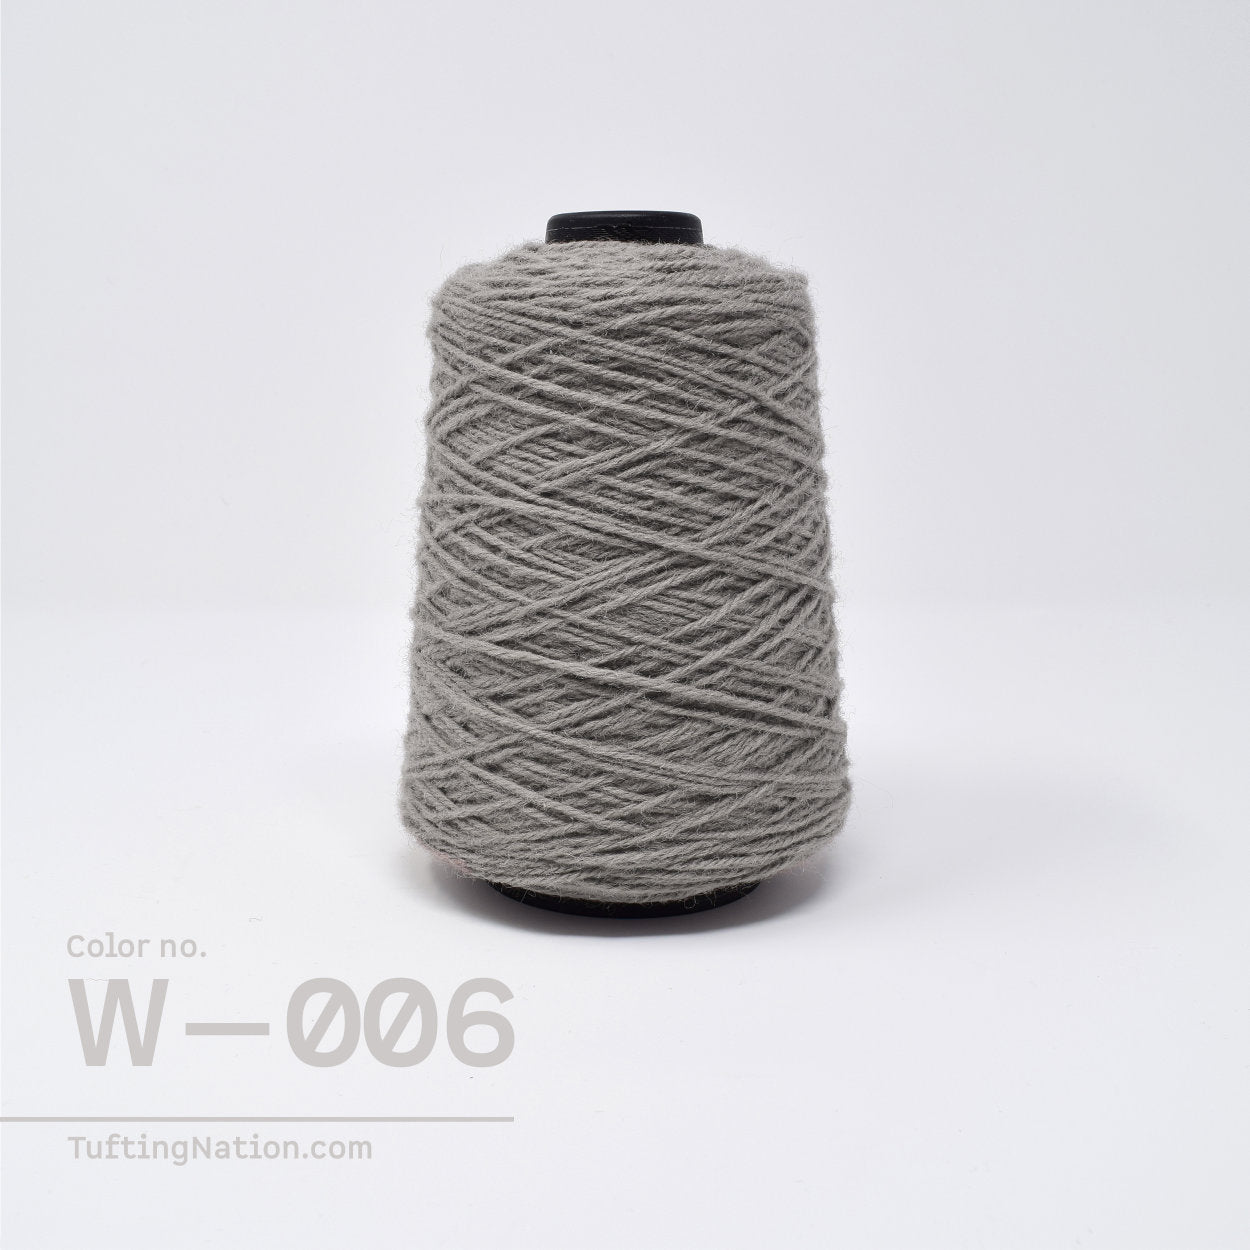 Grey Rug Wool Yarn on cones for Rug Tufting, Weaving and Punch Needle | TuftingNation